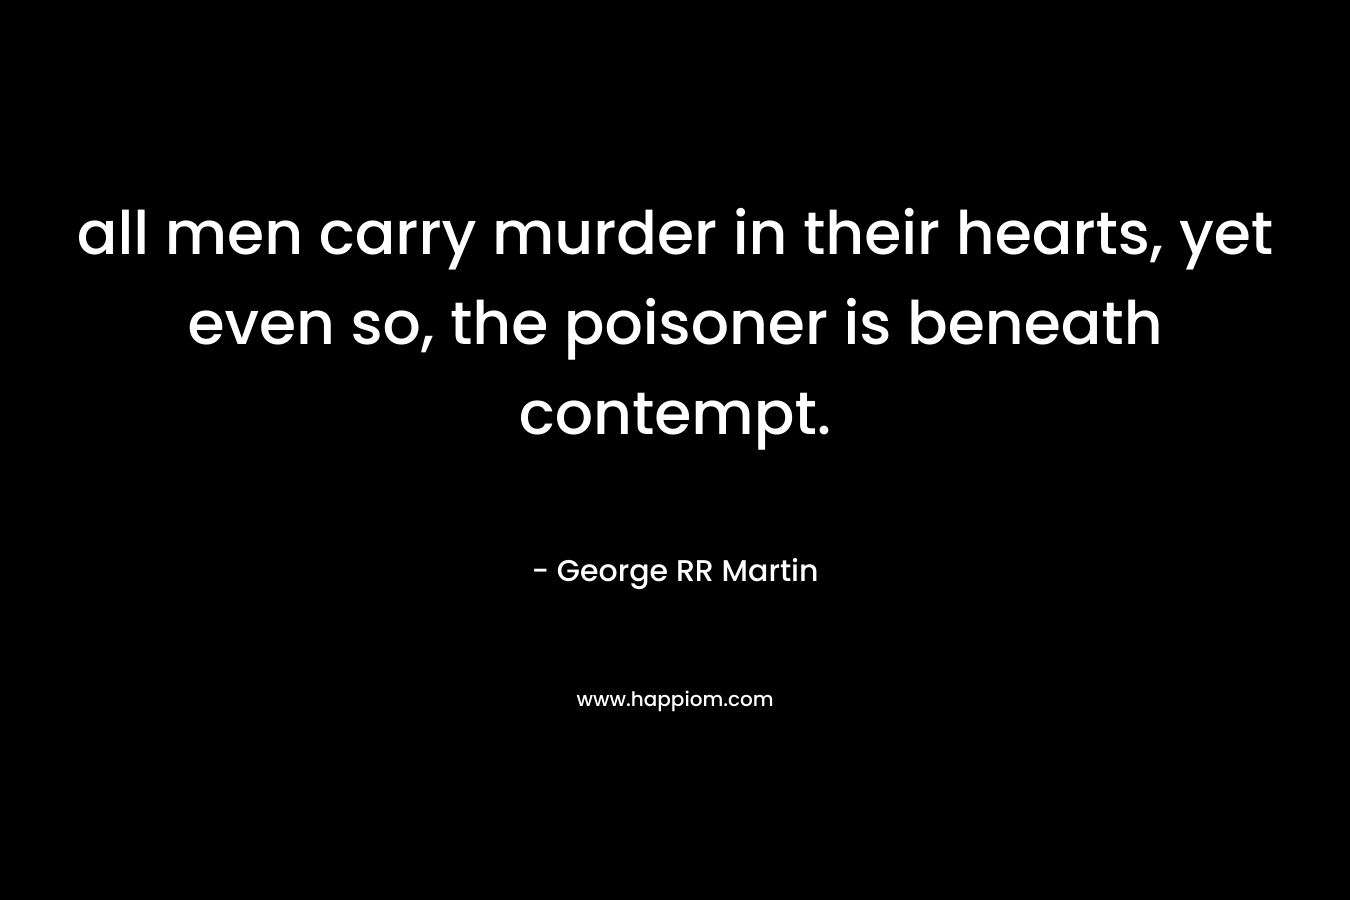 all men carry murder in their hearts, yet even so, the poisoner is beneath contempt. – George RR Martin